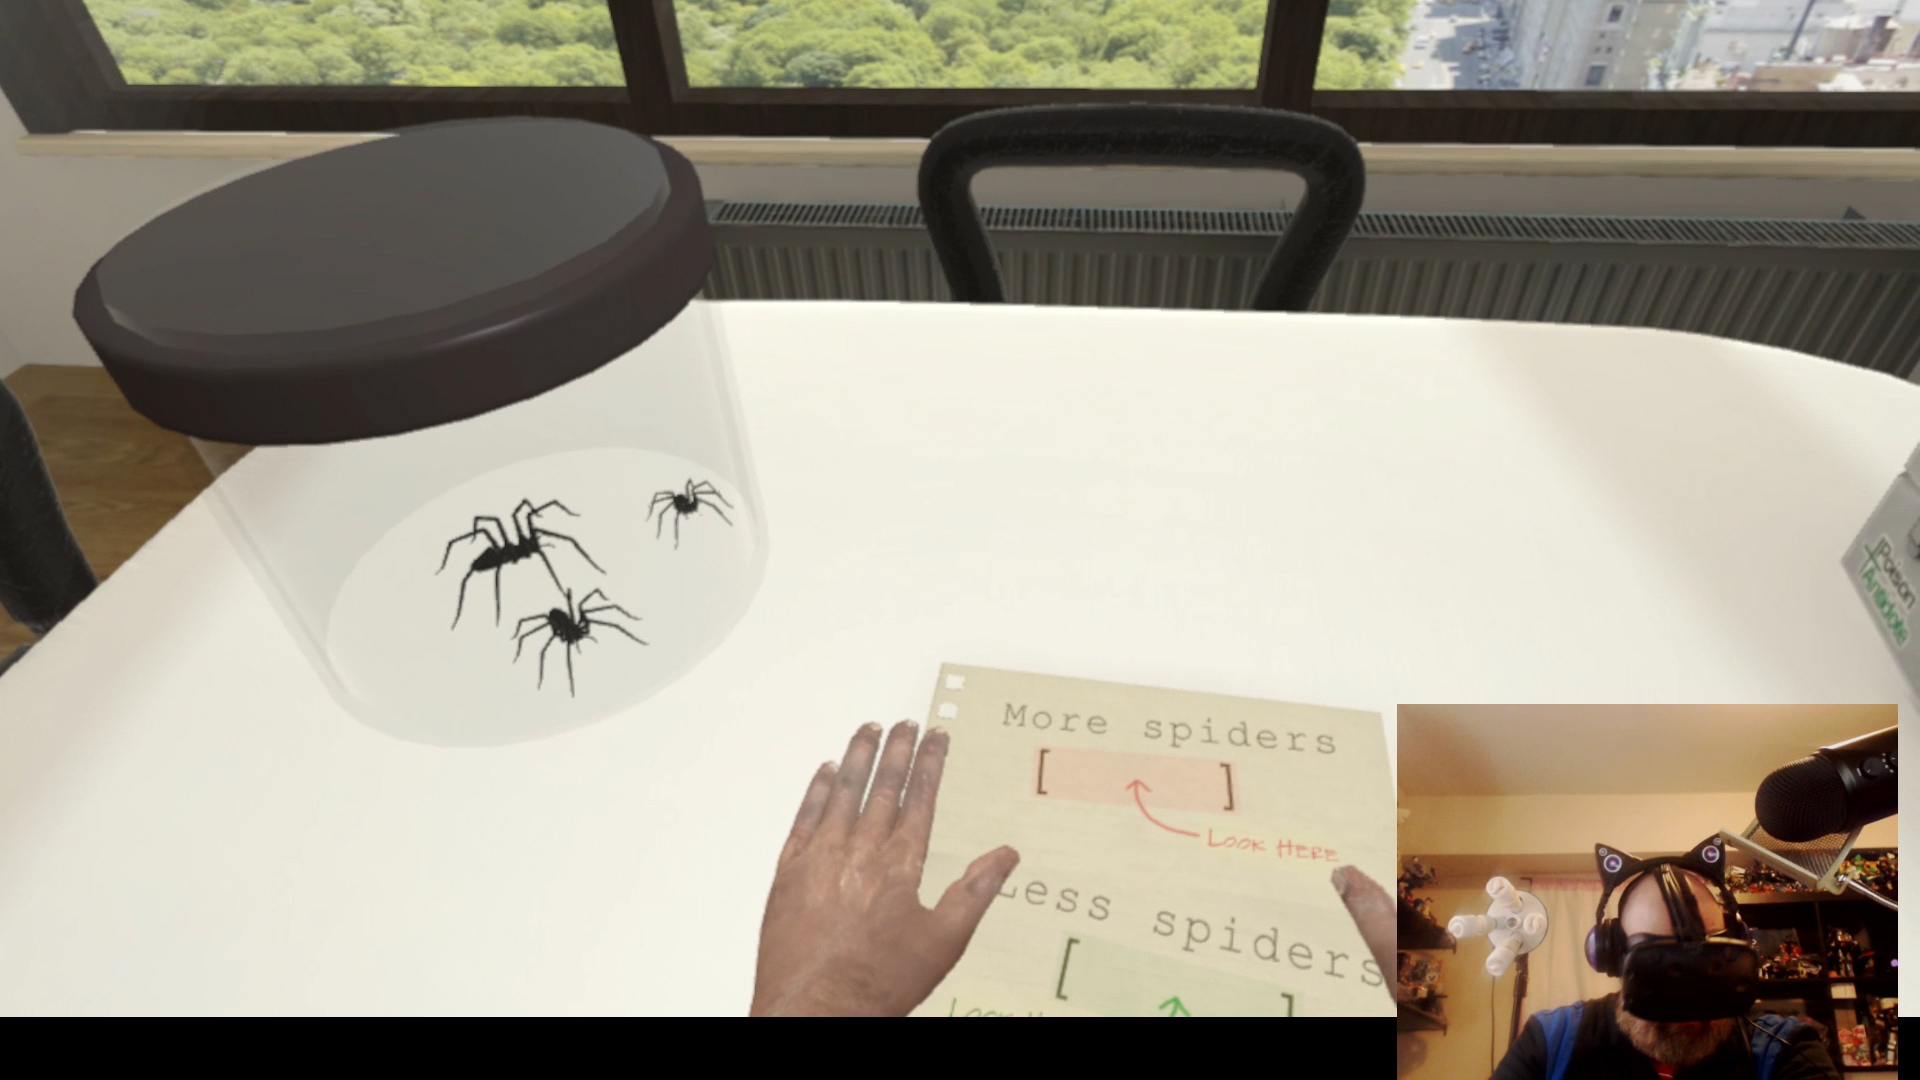 Virtual Reality Arachnophobia Therapy Is A Definite Nope